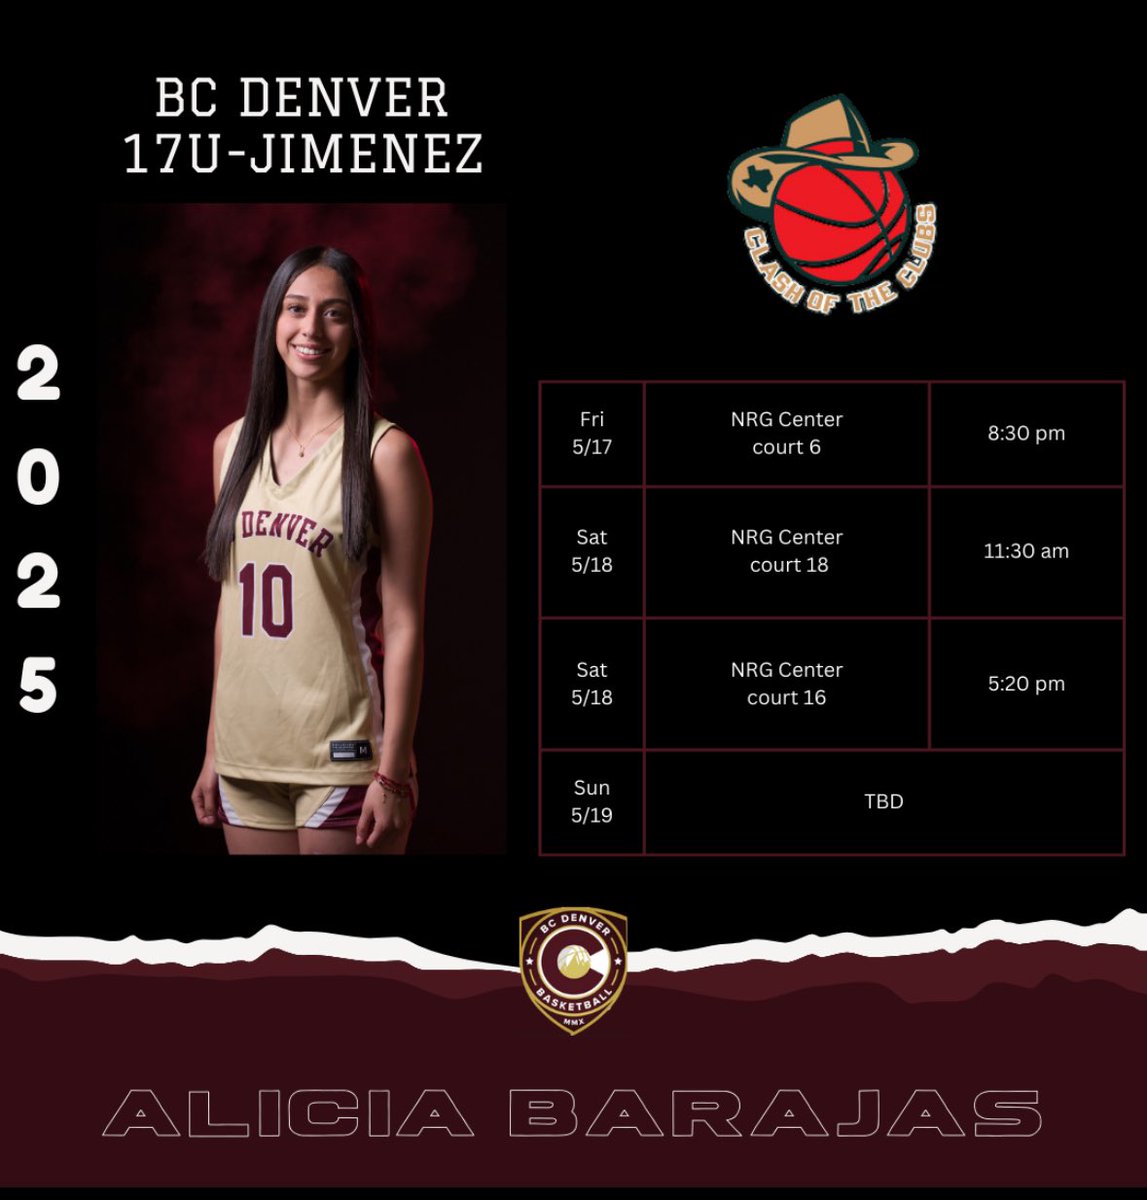 Excited to compete this weekend with my team! @BCDenver_WBB